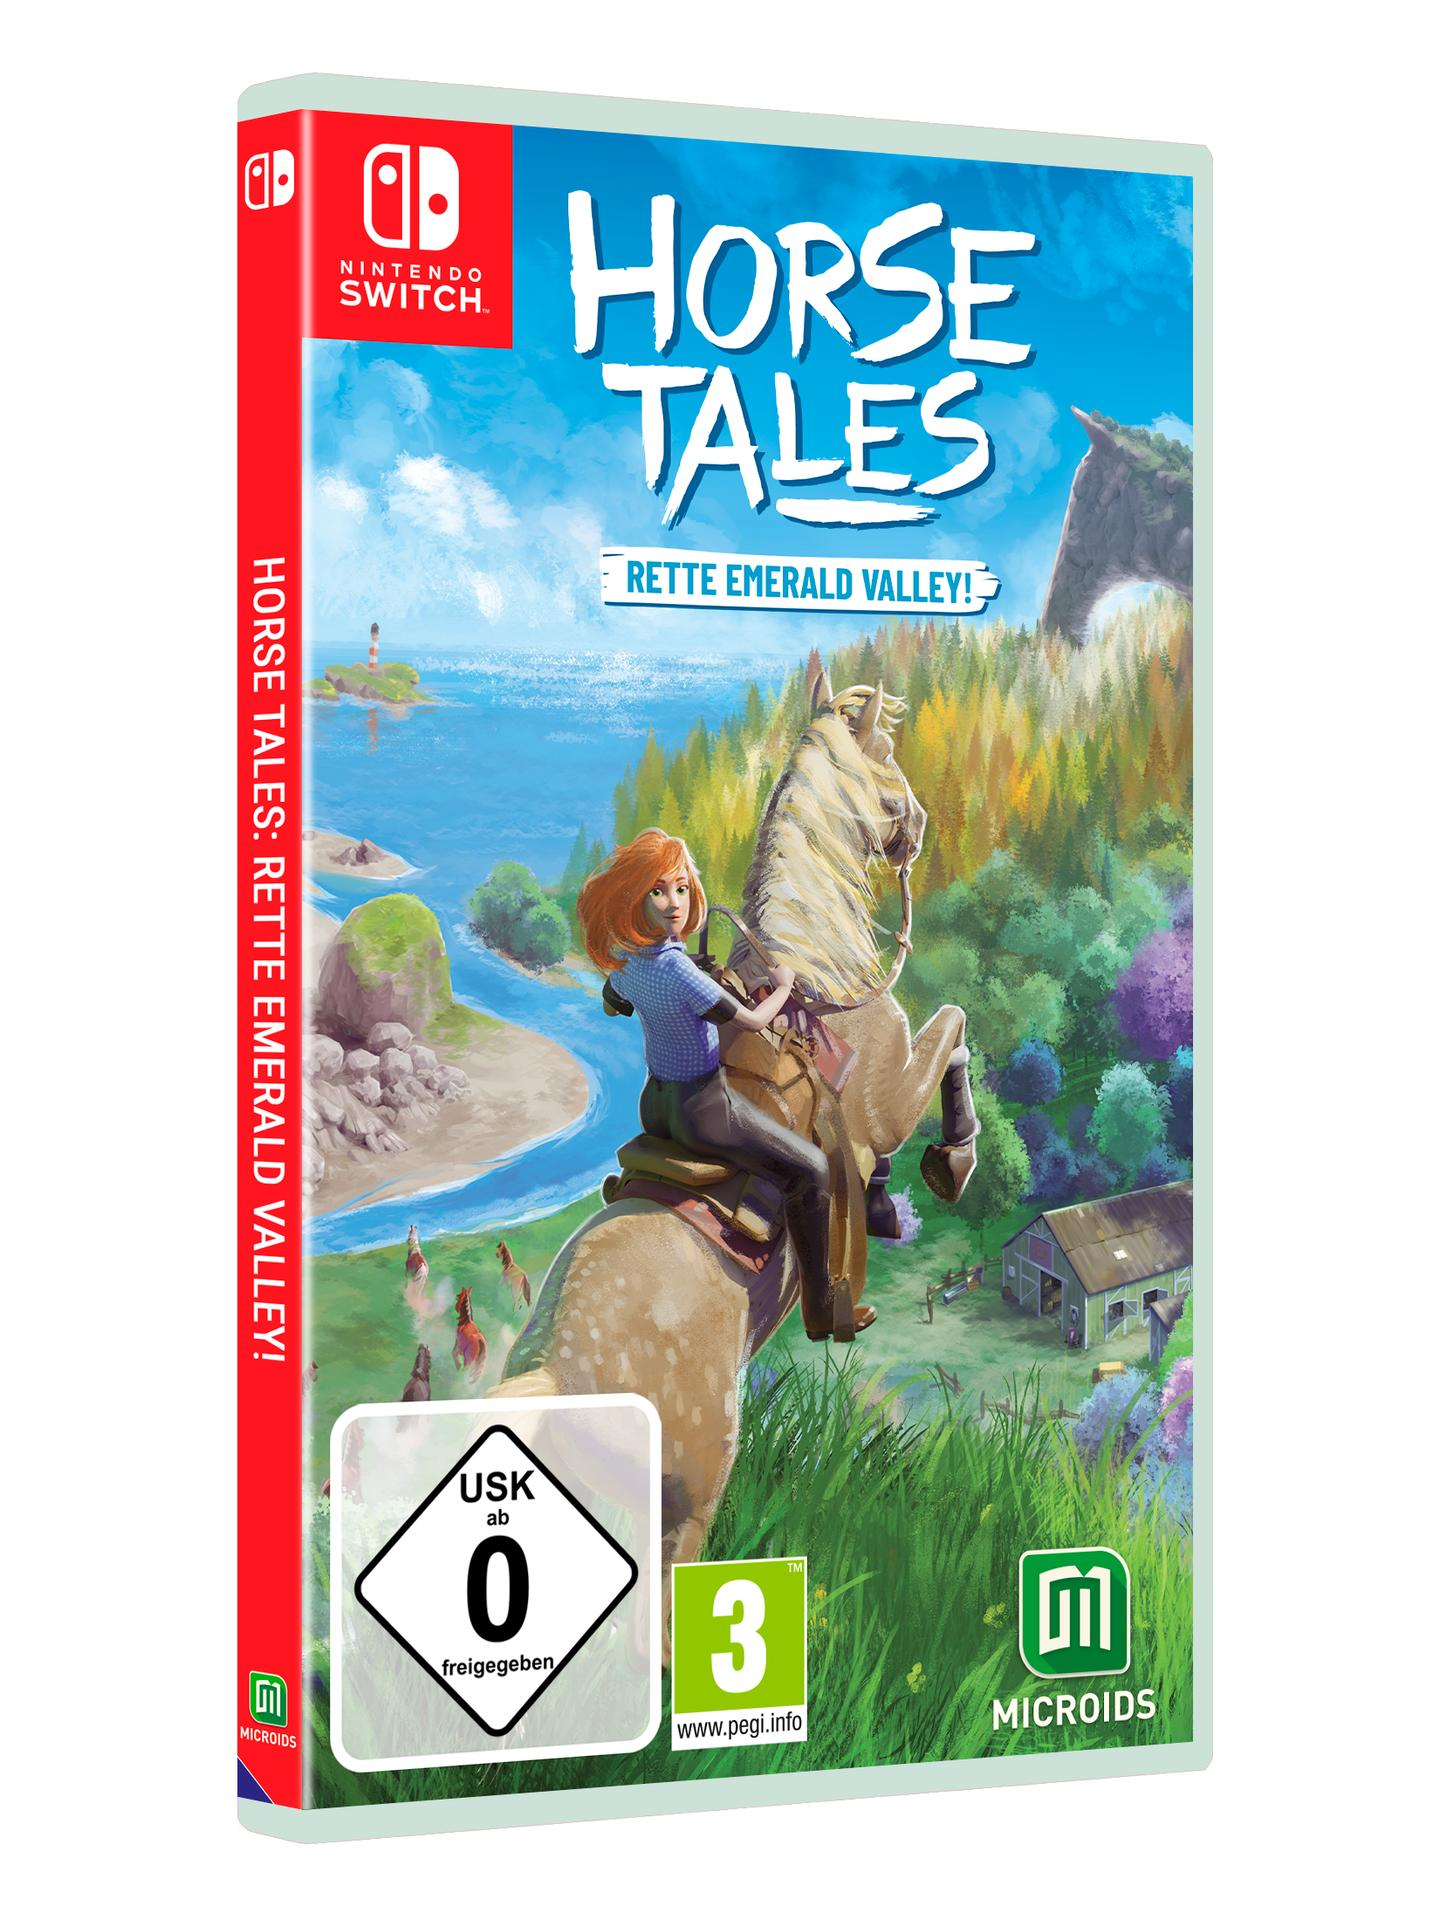 - Limited Edition [Nintendo Valley! Switch] - Emerald Horse Tales: Rette